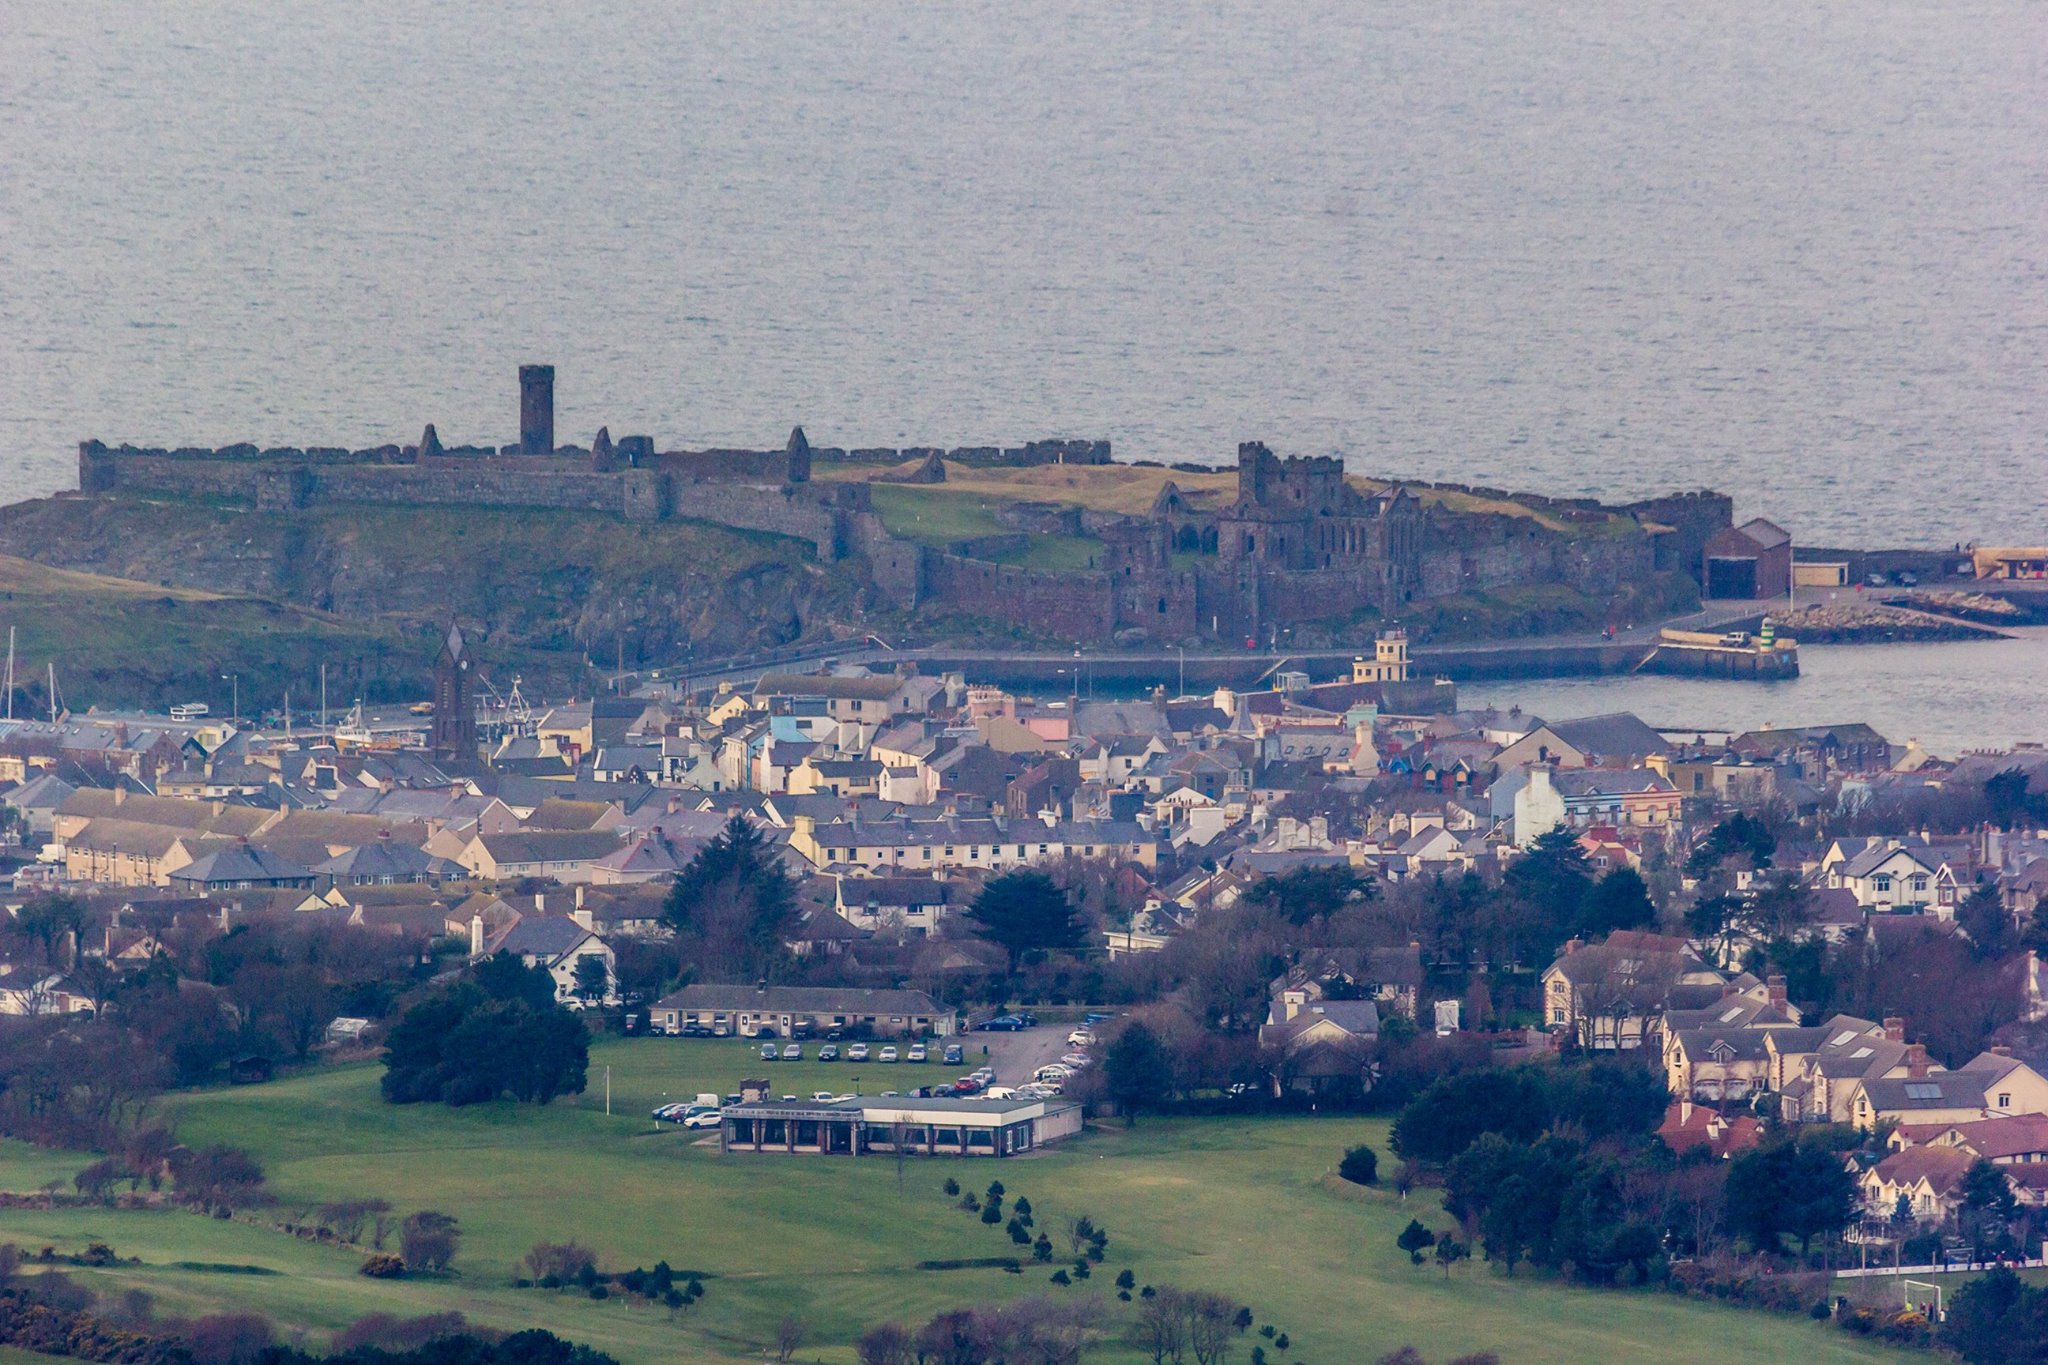 Looking at Peel Castle over part of Peel and the Golf Course Club House from the Cairn, by Paul Smith